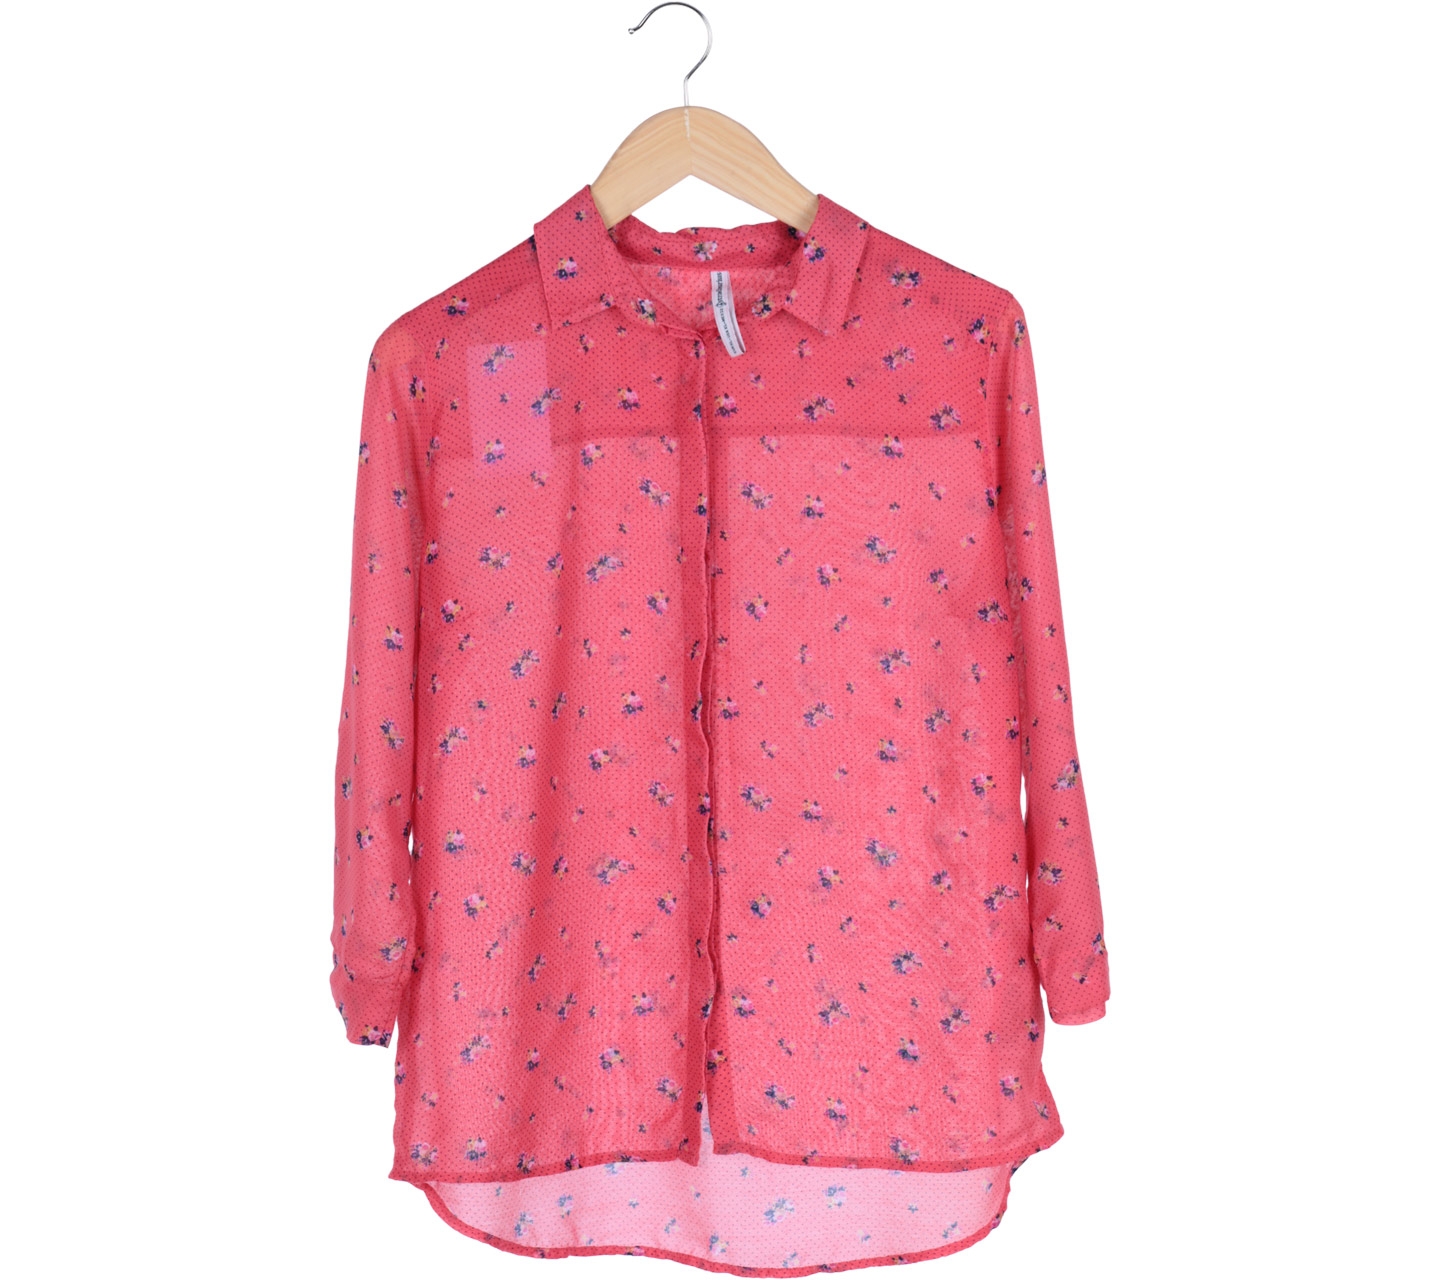 Stradivarius Red Floral Dotted Shirt